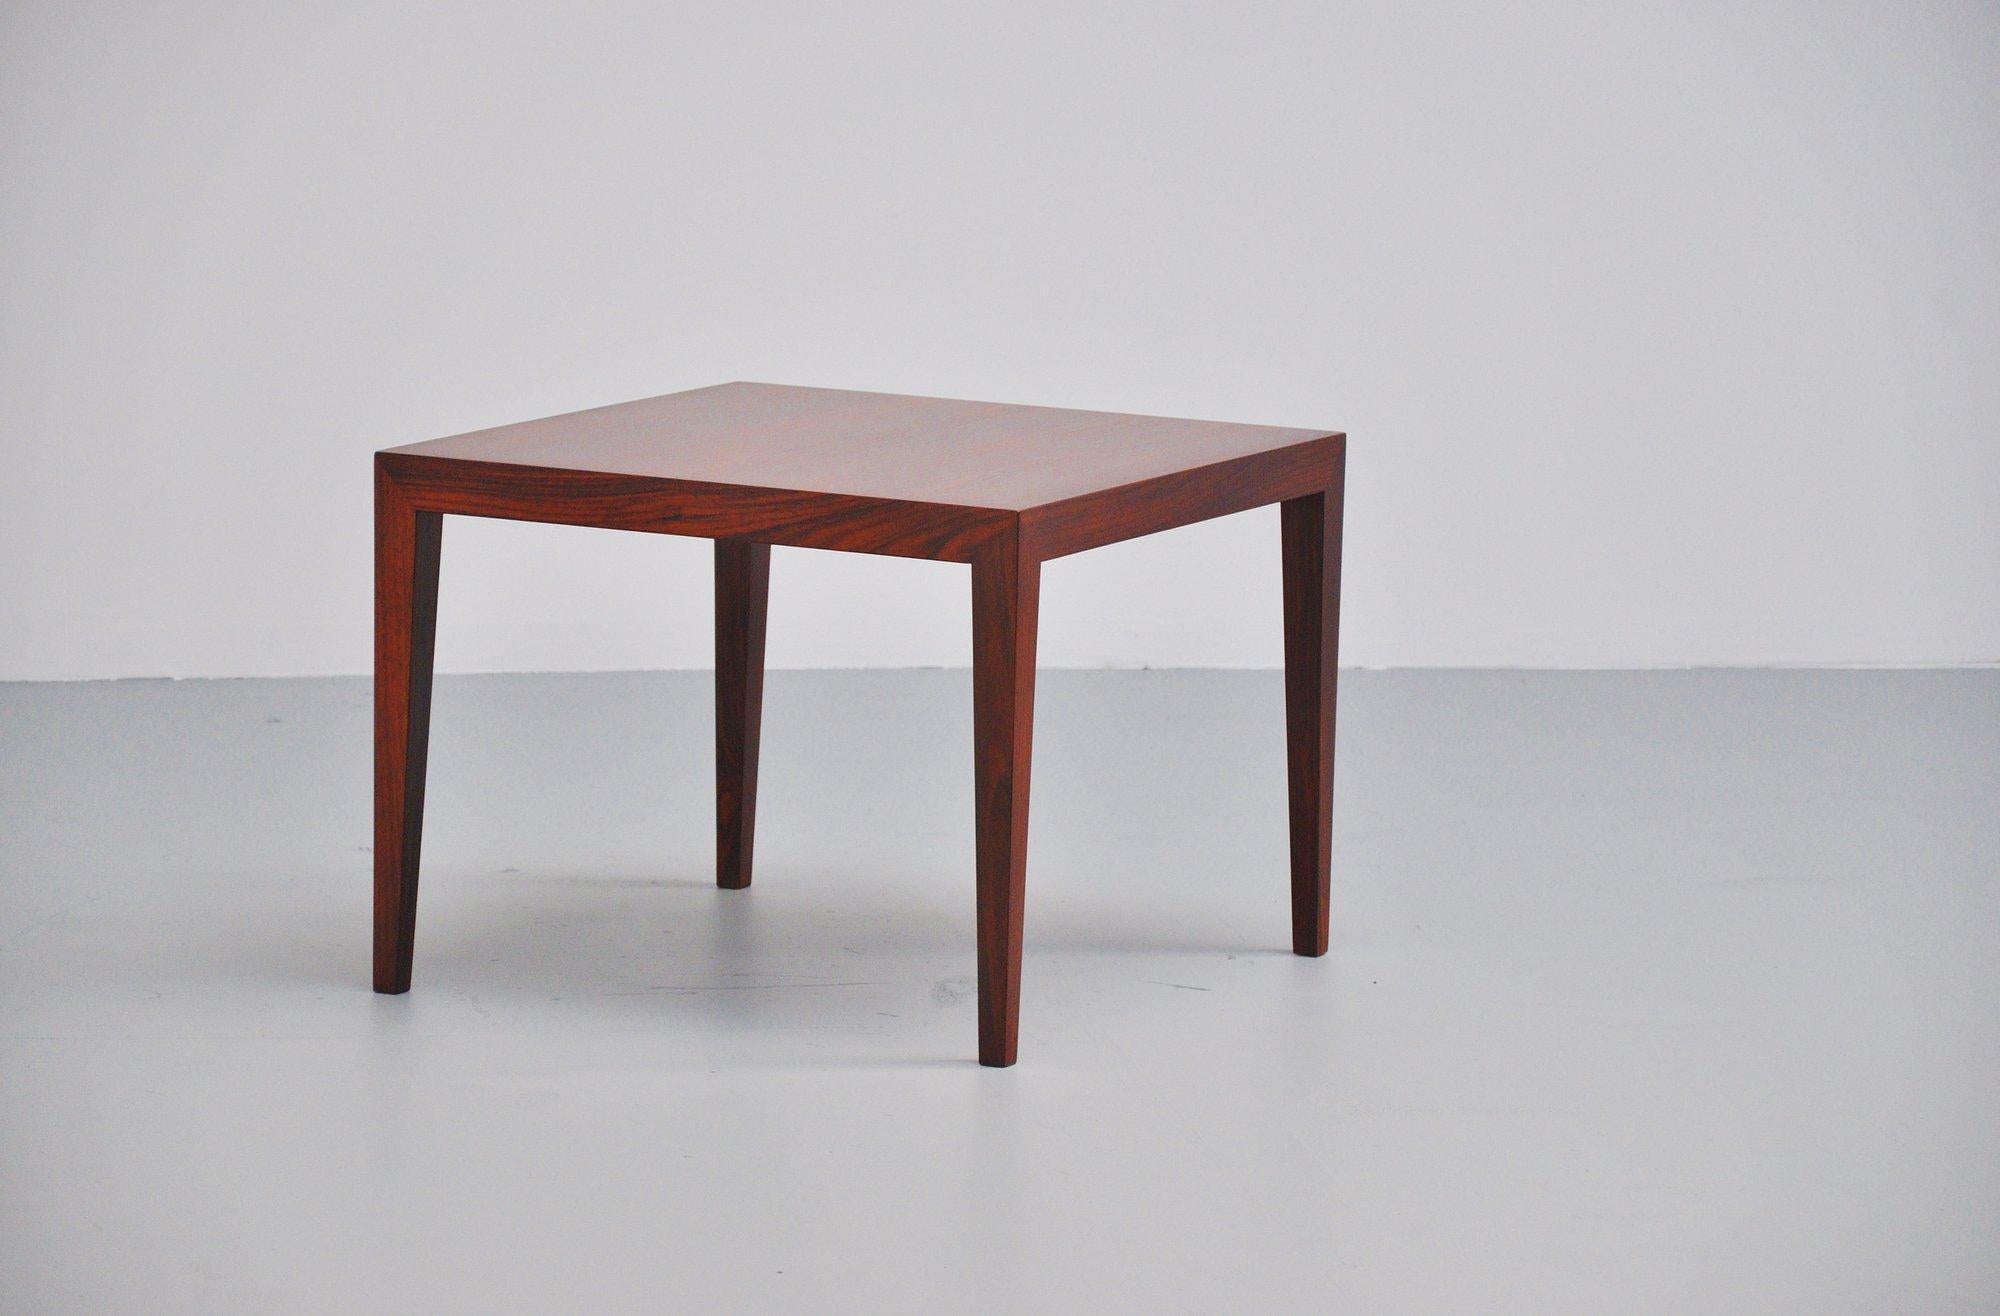 Very nice small and subtle coffee table designed by Severin Hansen and manufactured by Haslev Mobelfabrik.
Beautiful grained rosewood, nicely finished.